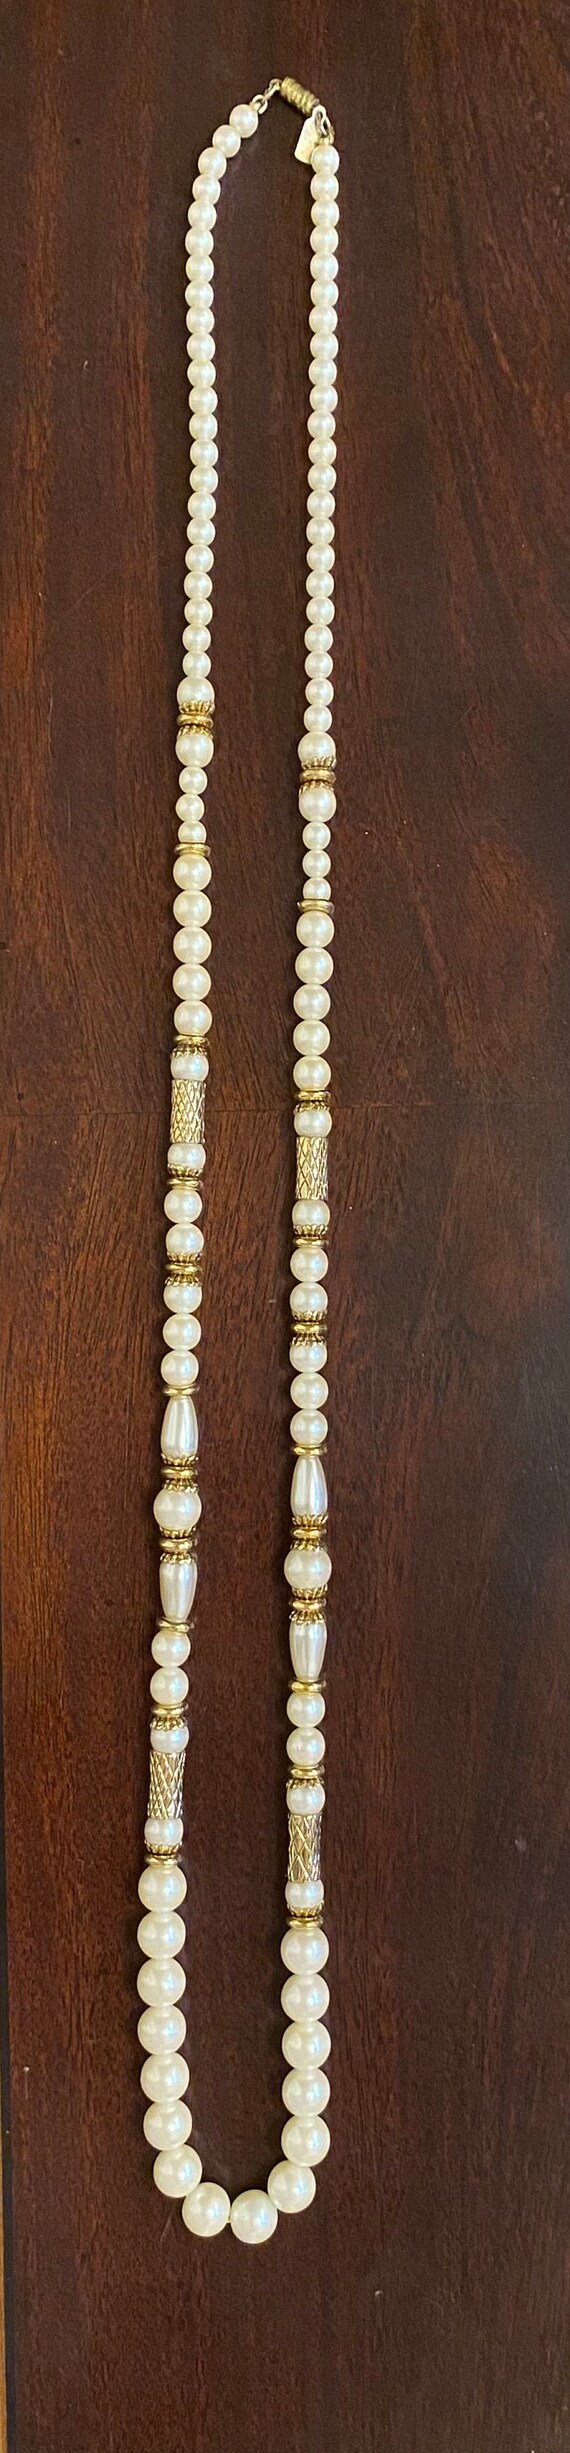 1928 Brand Faux Pearl Necklace/ 36 inches - image 3